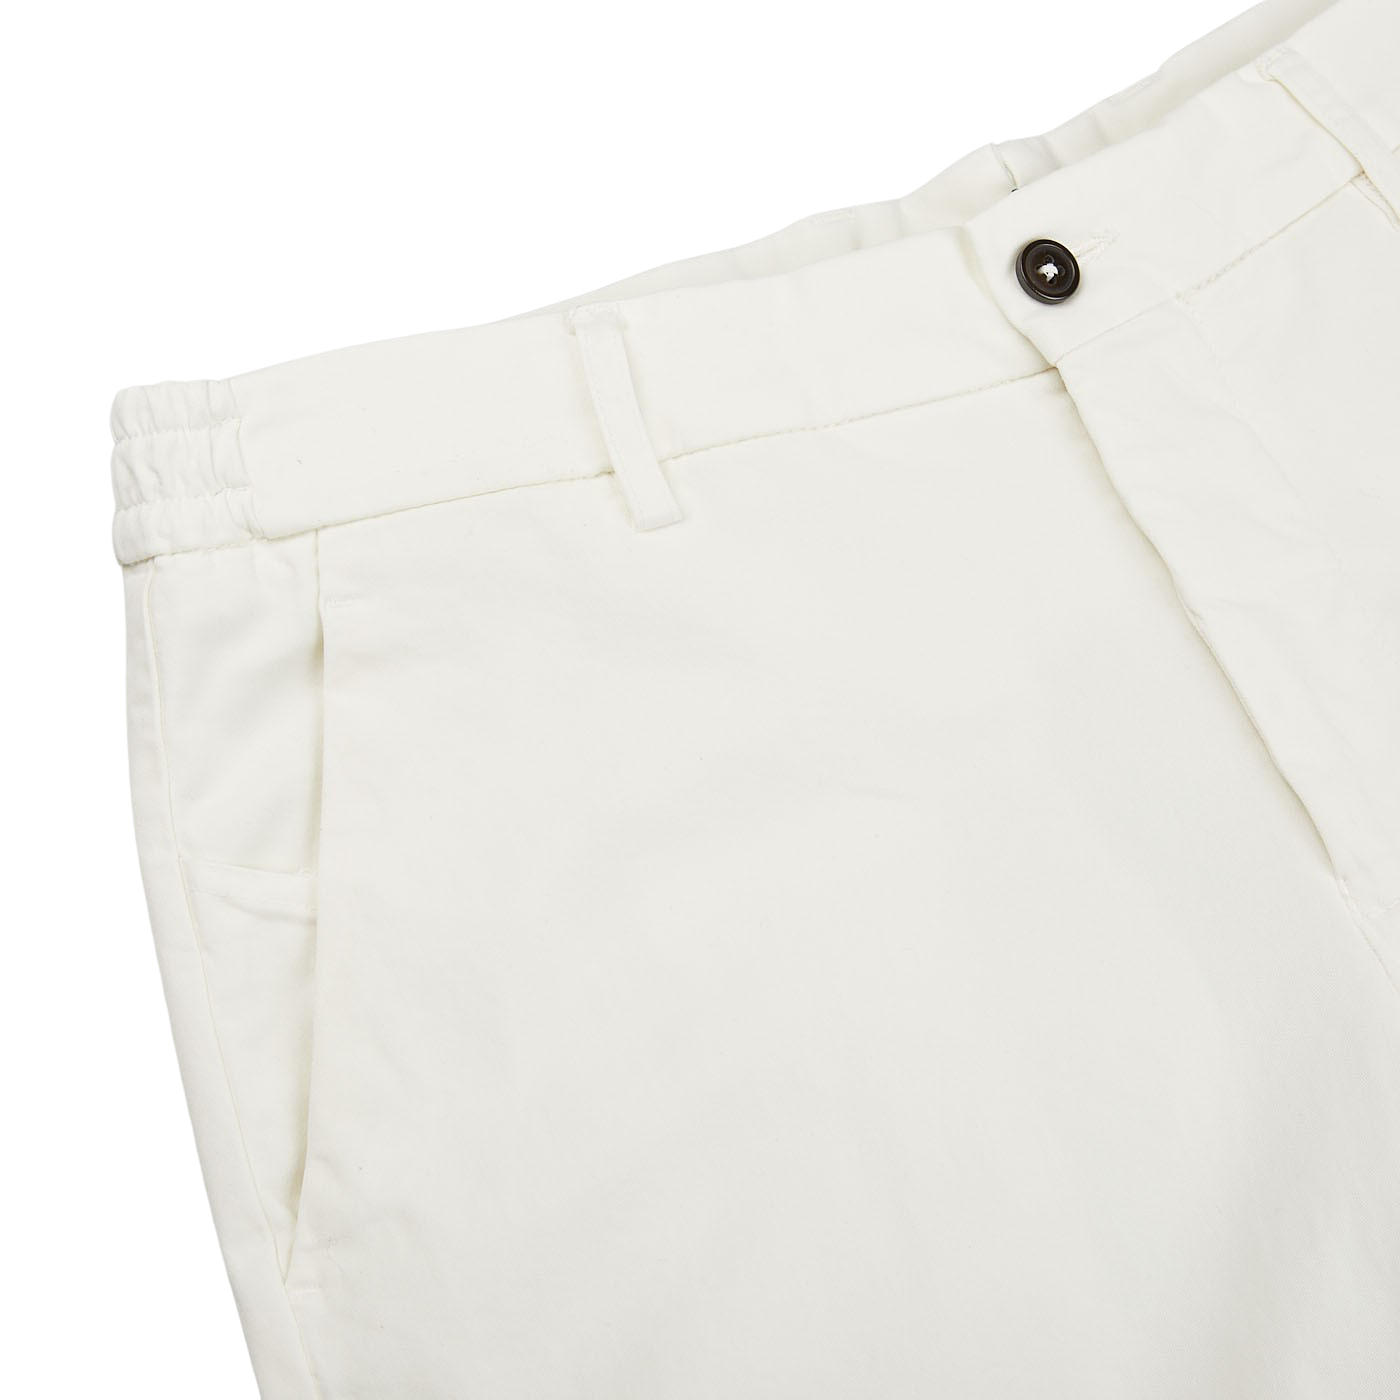 The Cream White Cotton Stretch Chinos by Berwich.